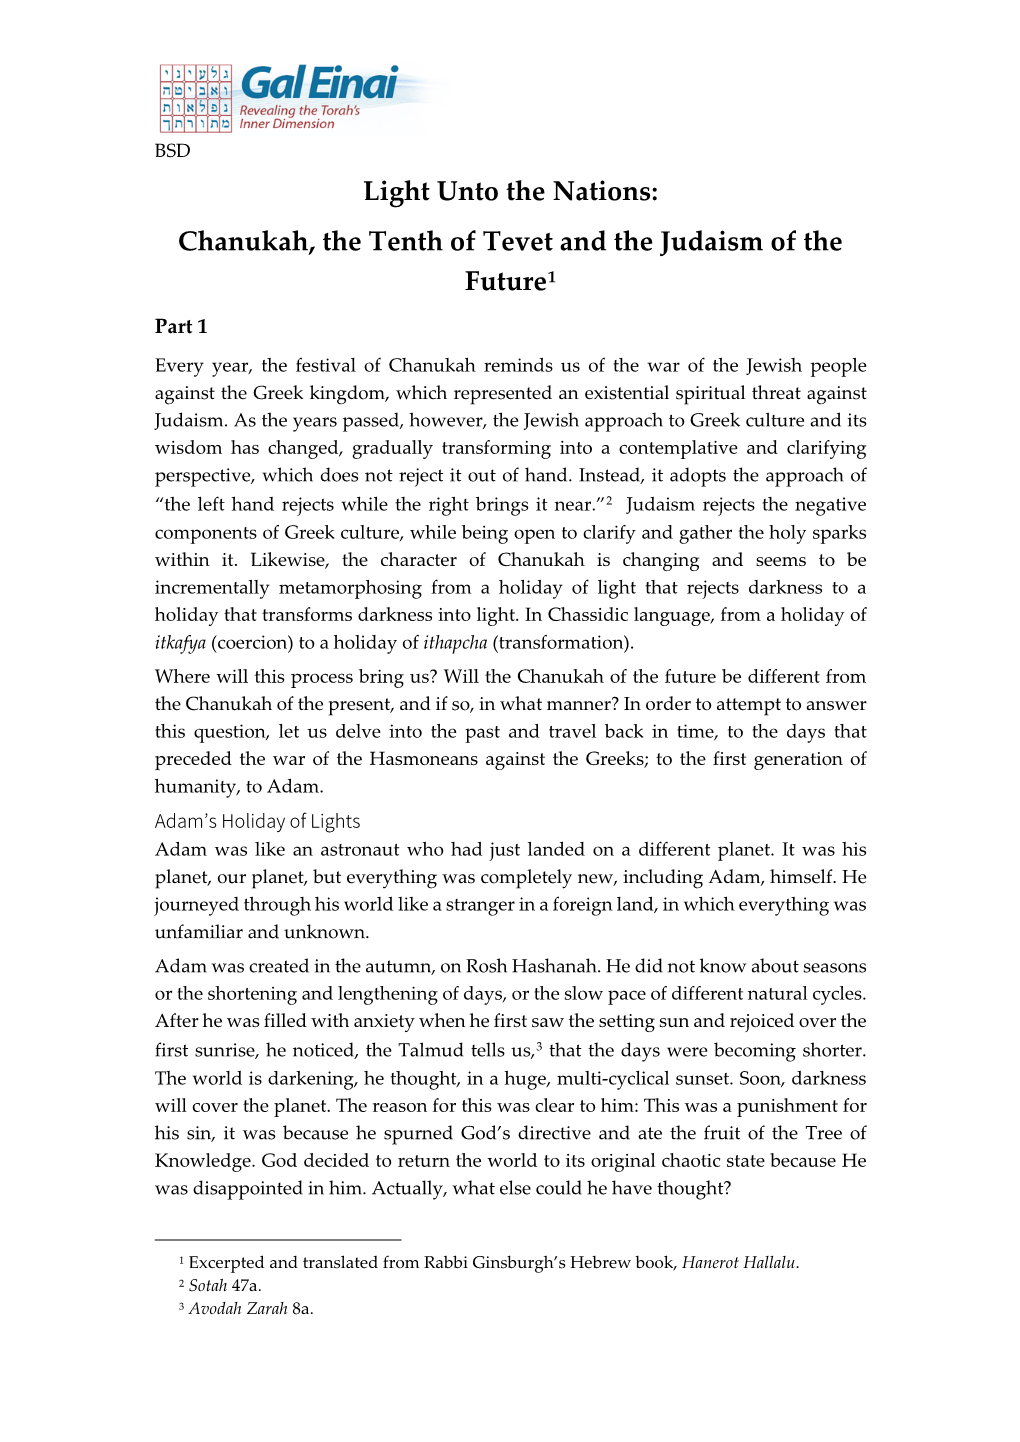 Light Unto the Nations: Chanukah, the Tenth of Tevet and the Judaism of the Future1